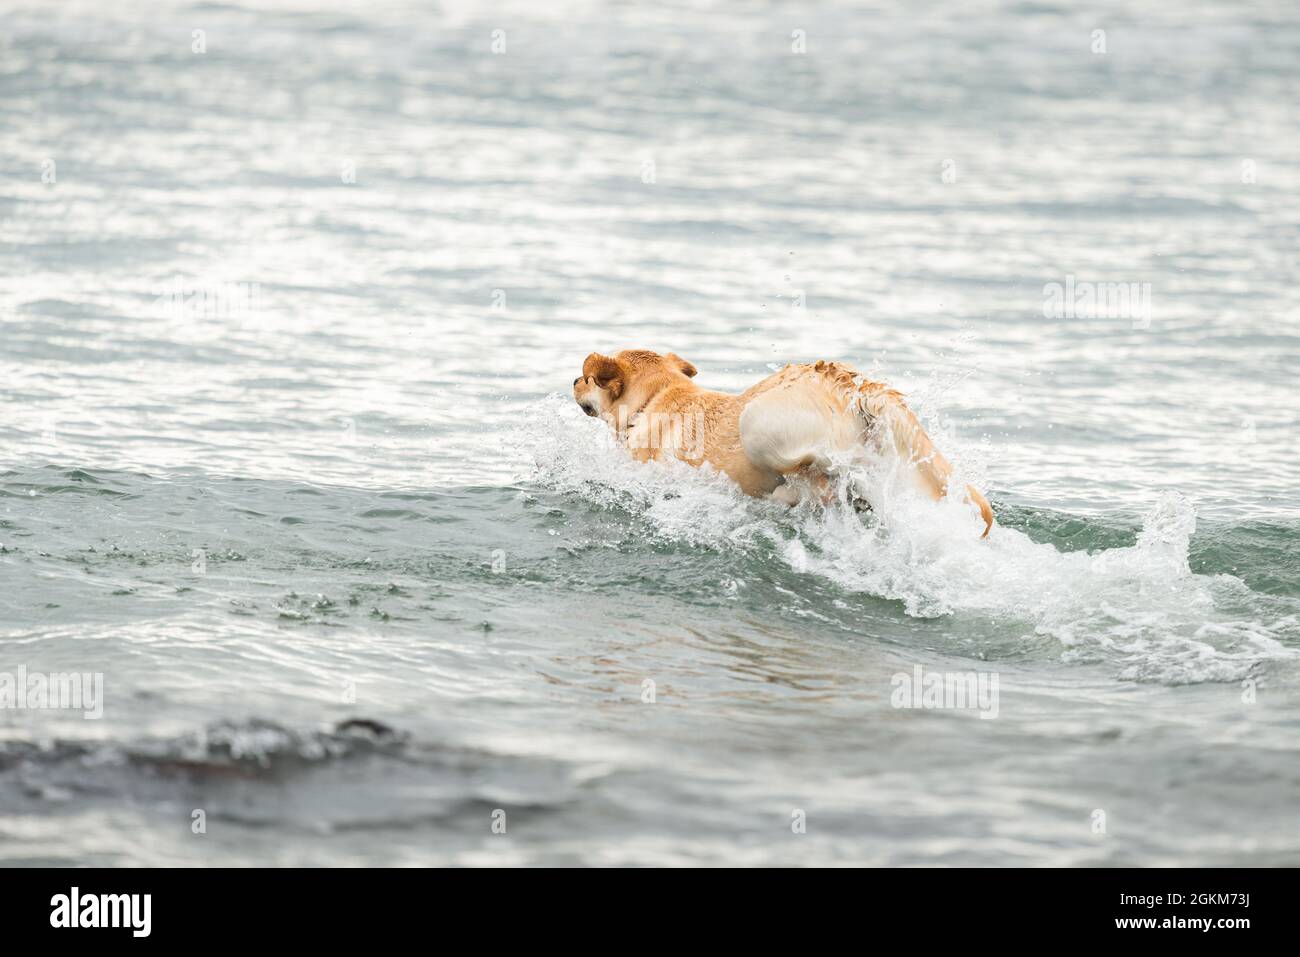 Dog jumping into the water on beach Stock Photo